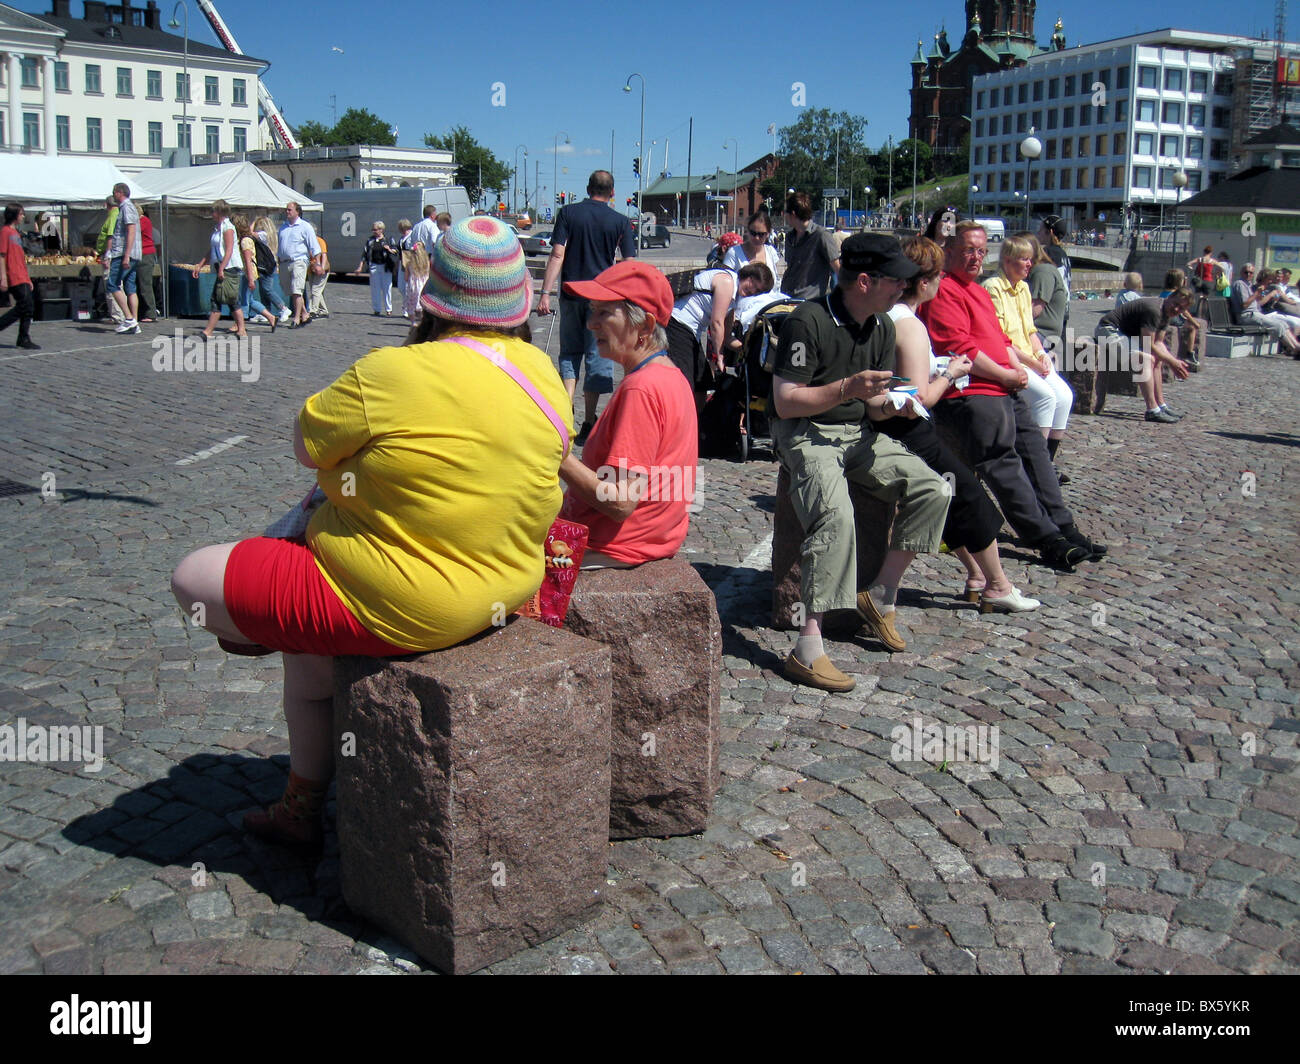 Back view of fat person. Stock Photo by ©Denisfilm 144953243